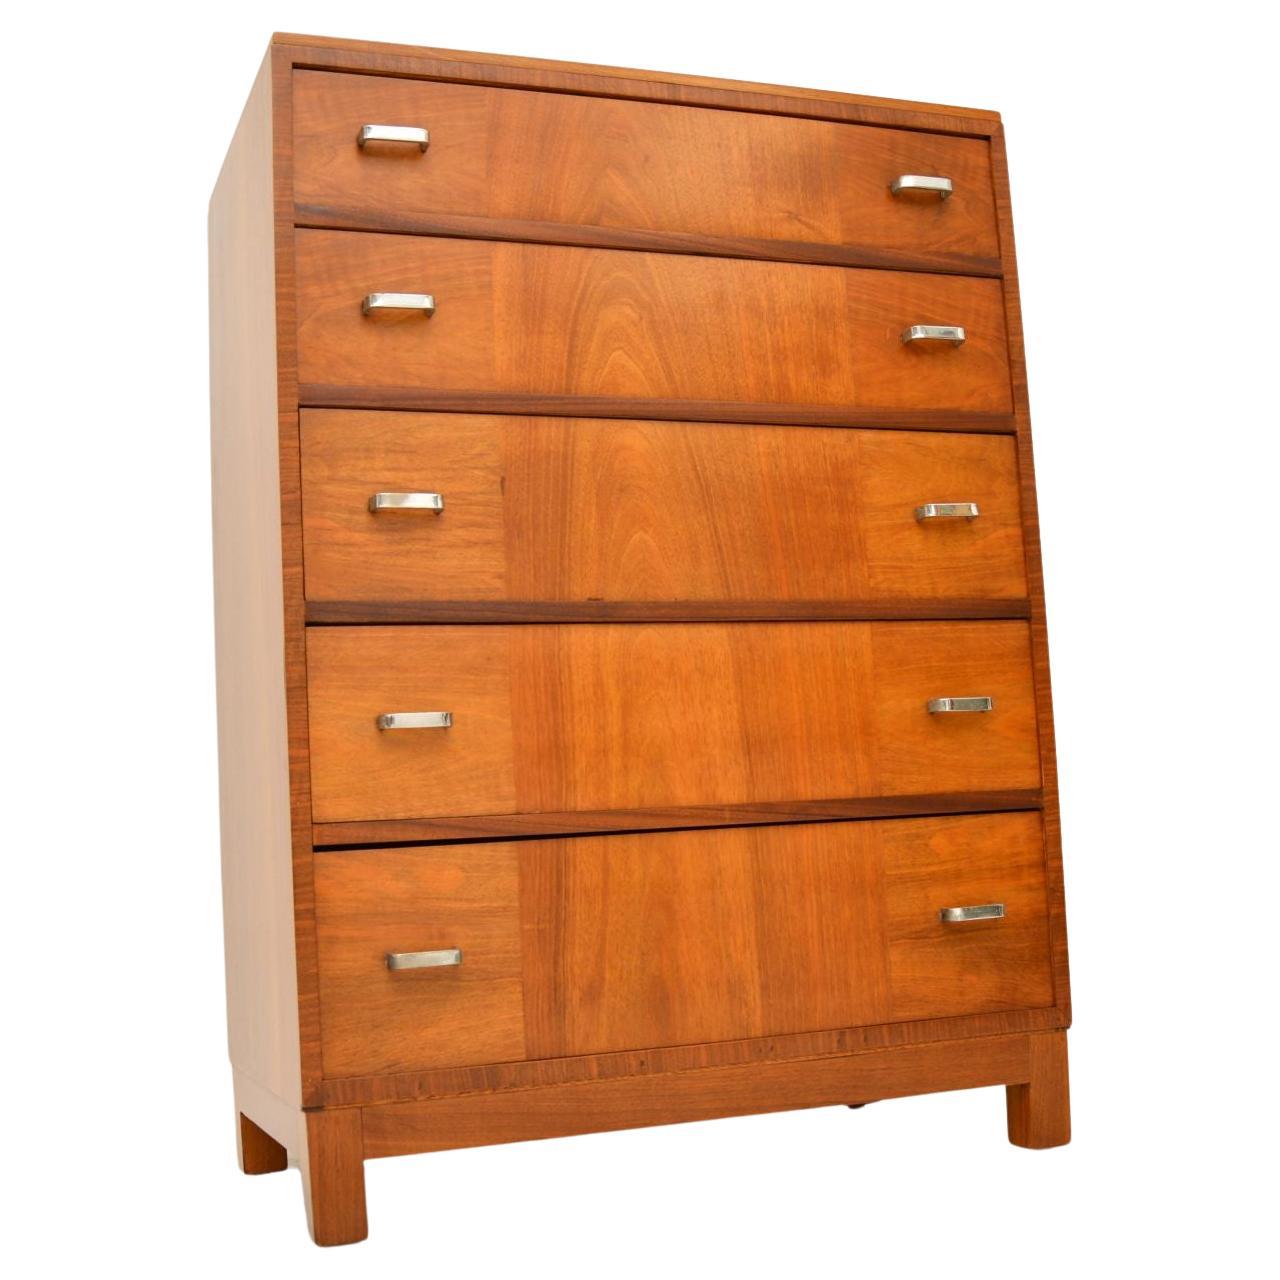 1920's Art Deco Walnut Chest of Drawers by Heal's